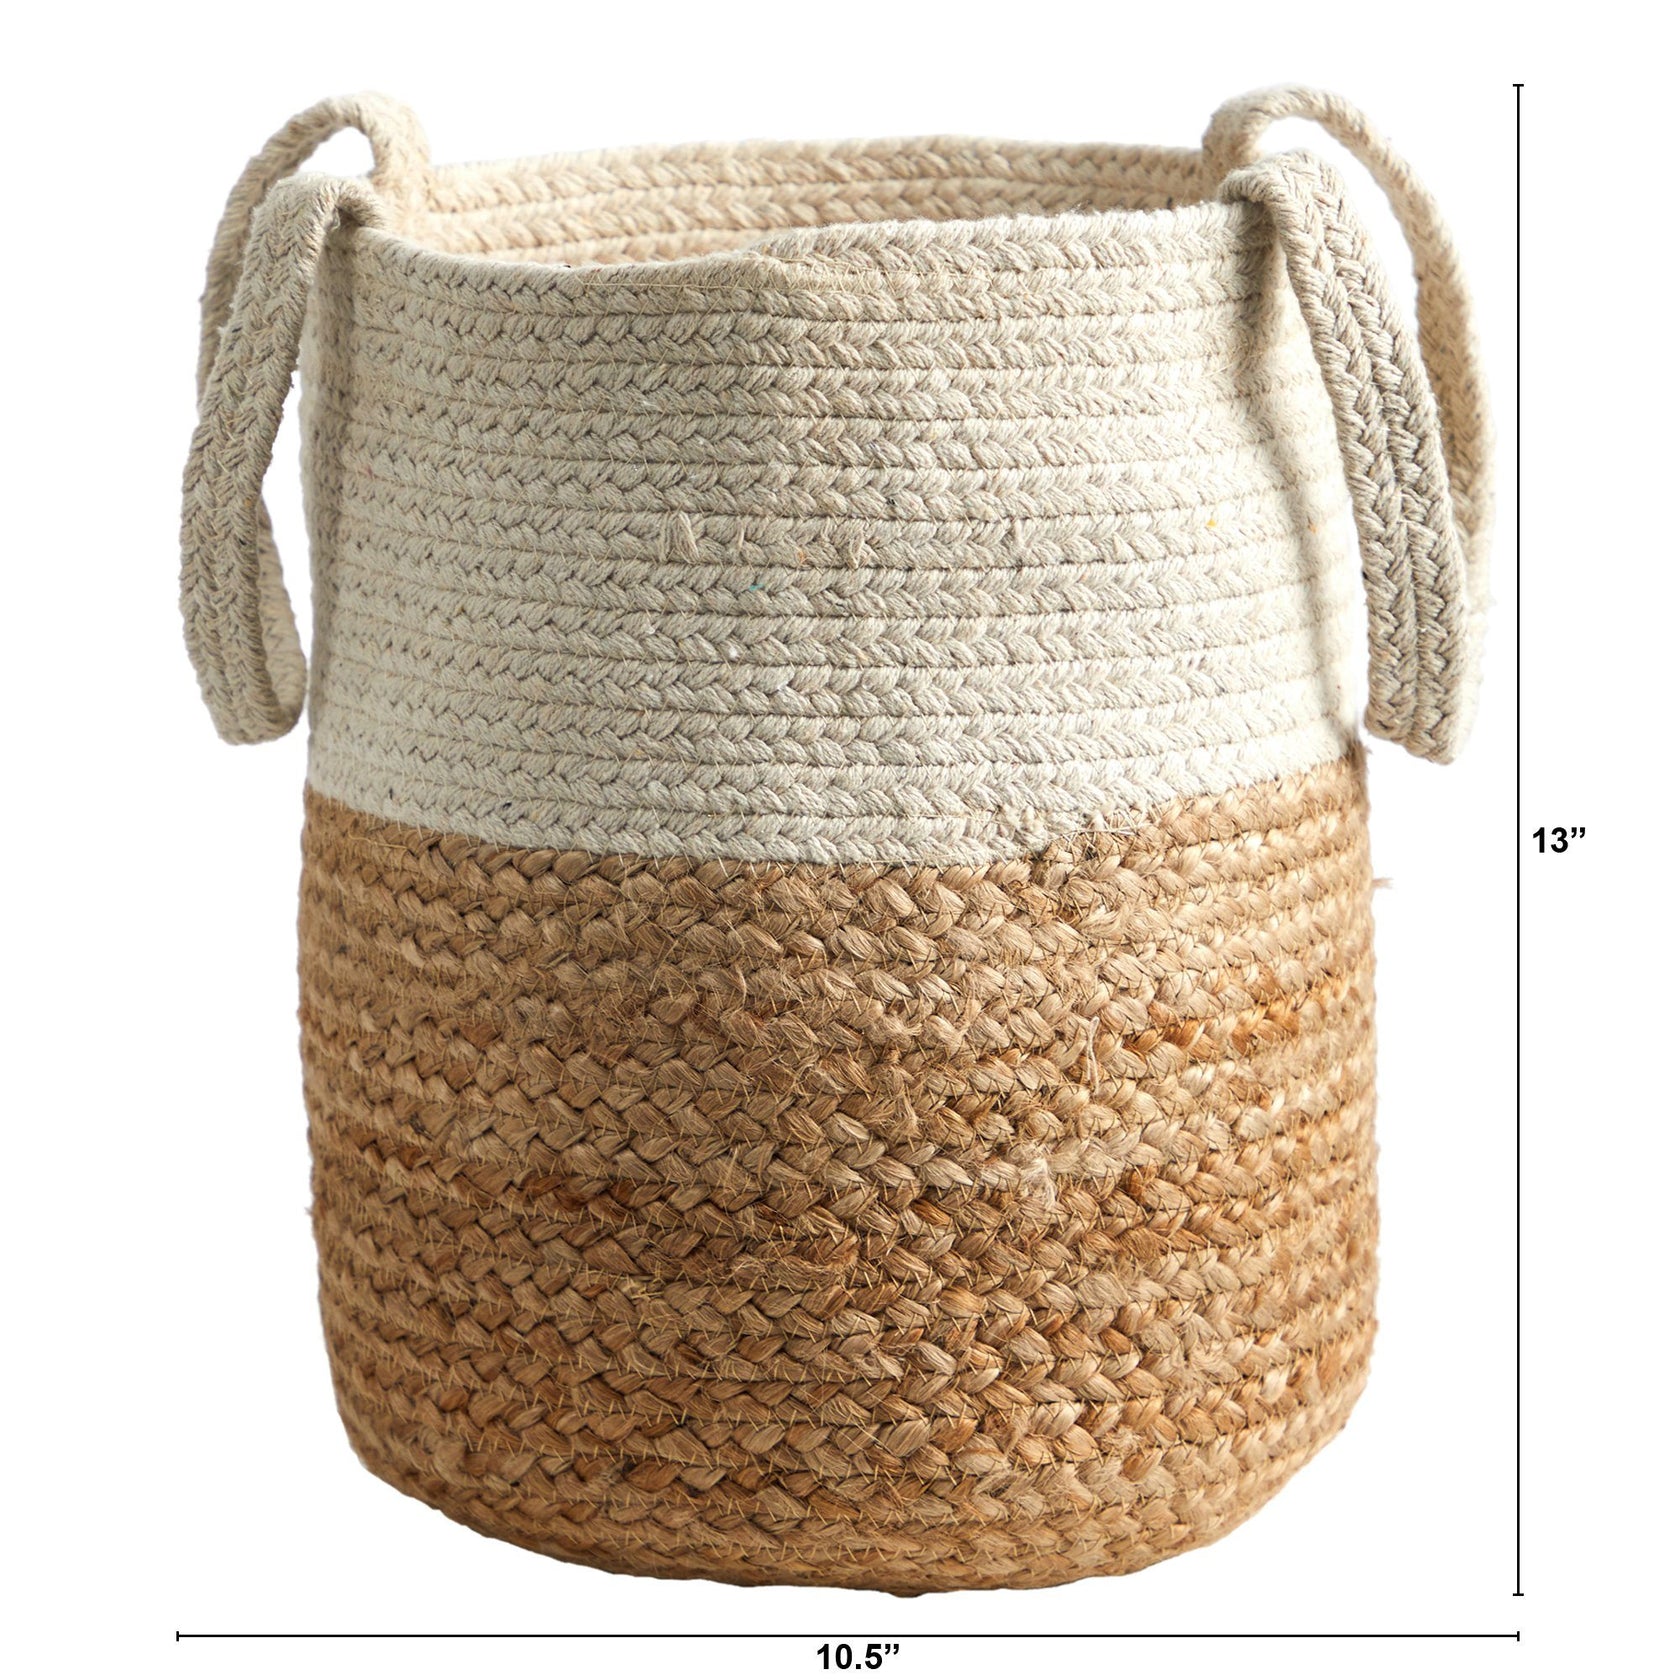 12.5” Handmade Natural Jute and Cotton Planter | Nearly Natural